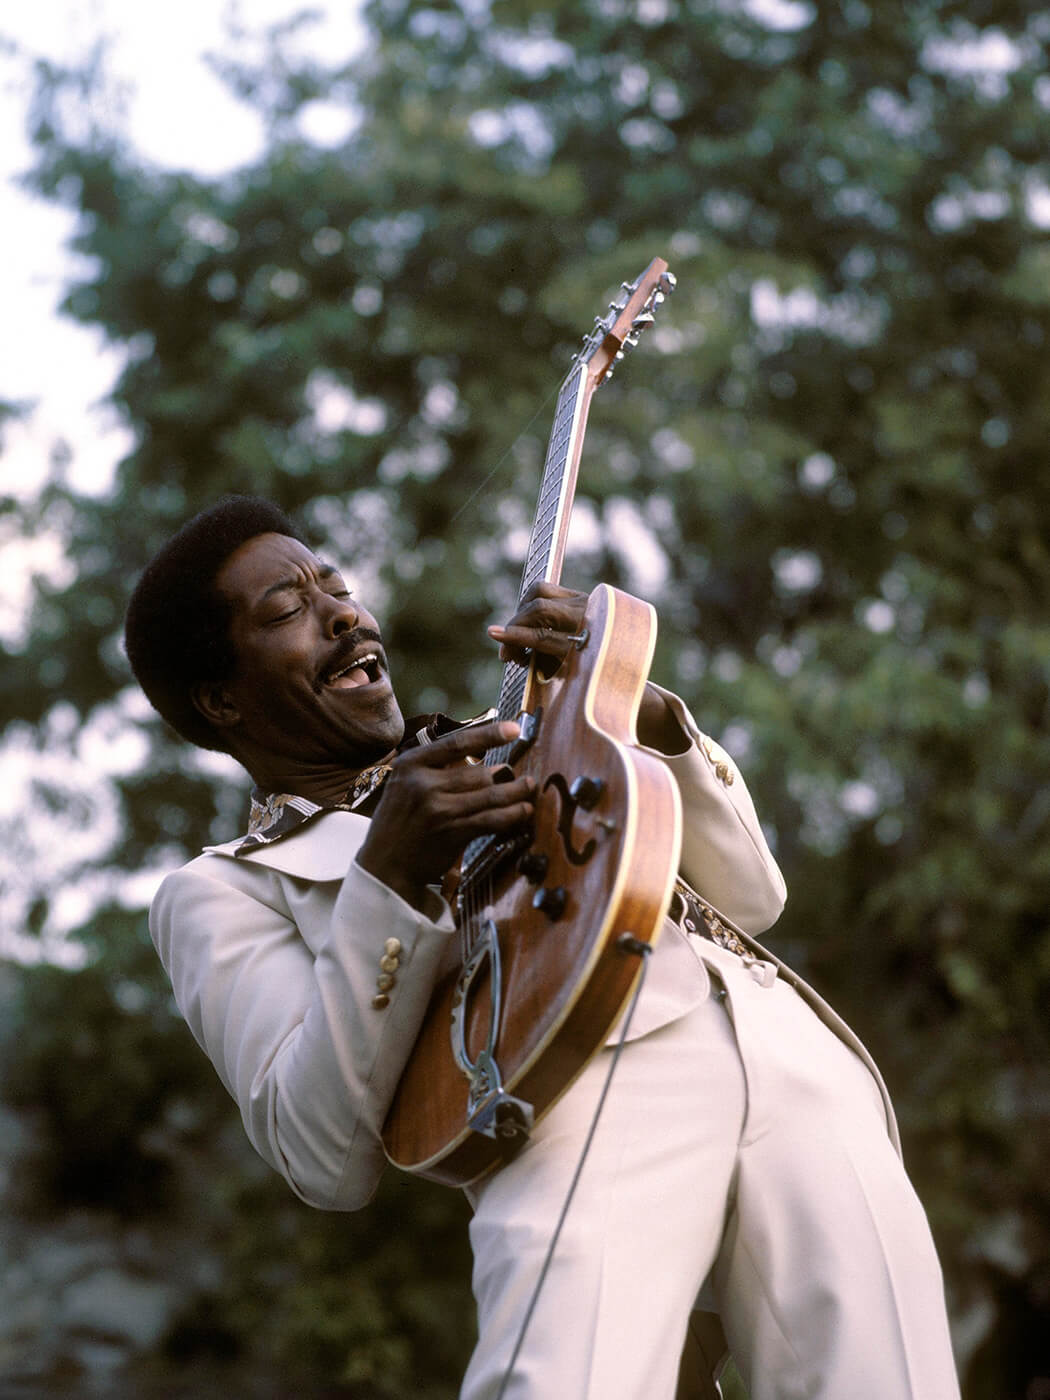 Buddy Guy performing with a Guild guitar in 1978 by David Redfern/Redferns via Getty Images